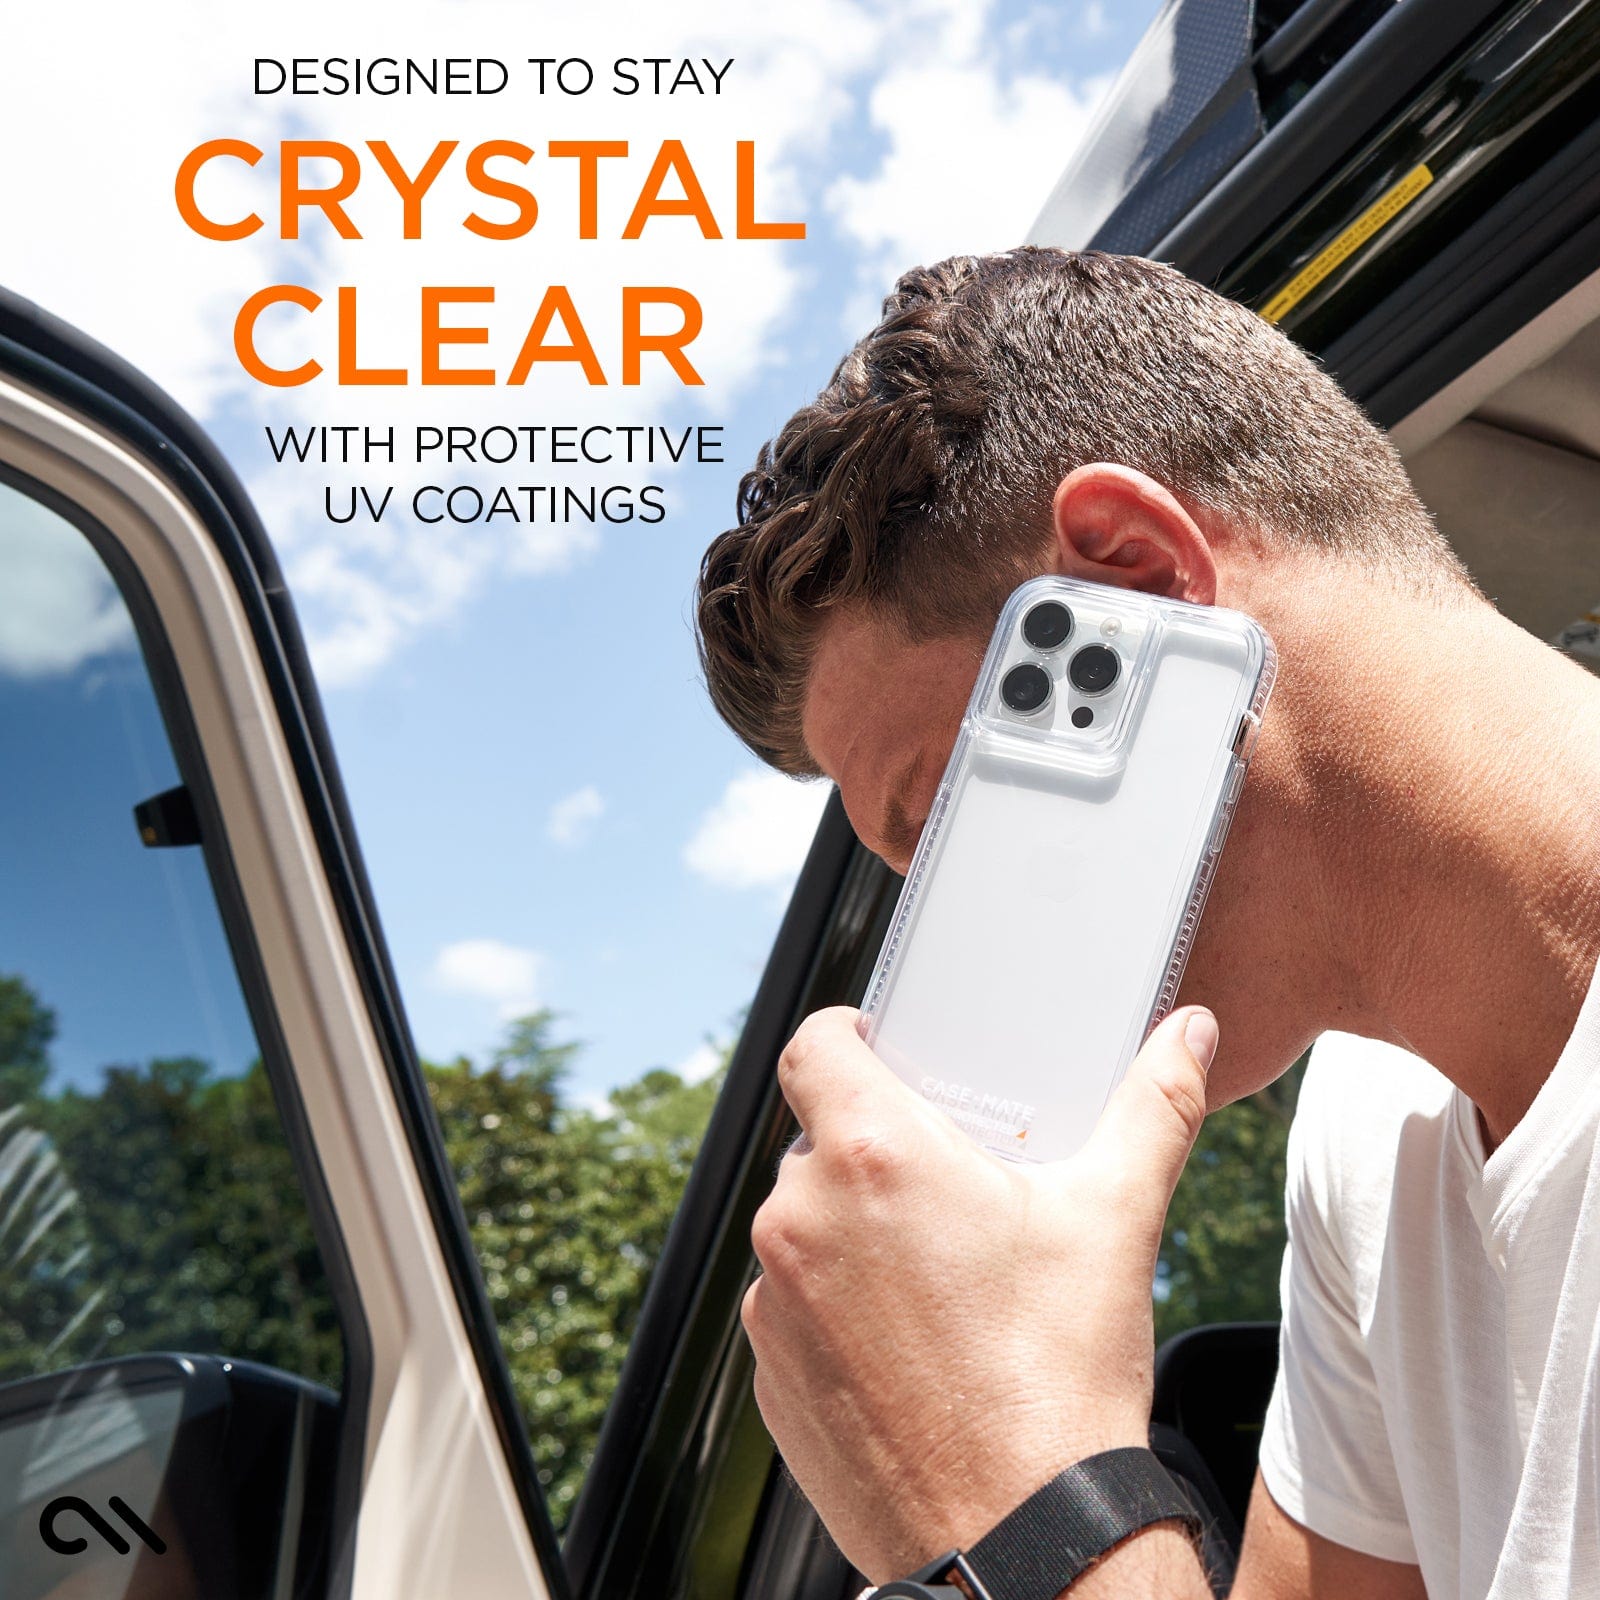 DESIGNED TO STAY CRYSTAL CLEAR WITH PROTECTIVE COATINGS